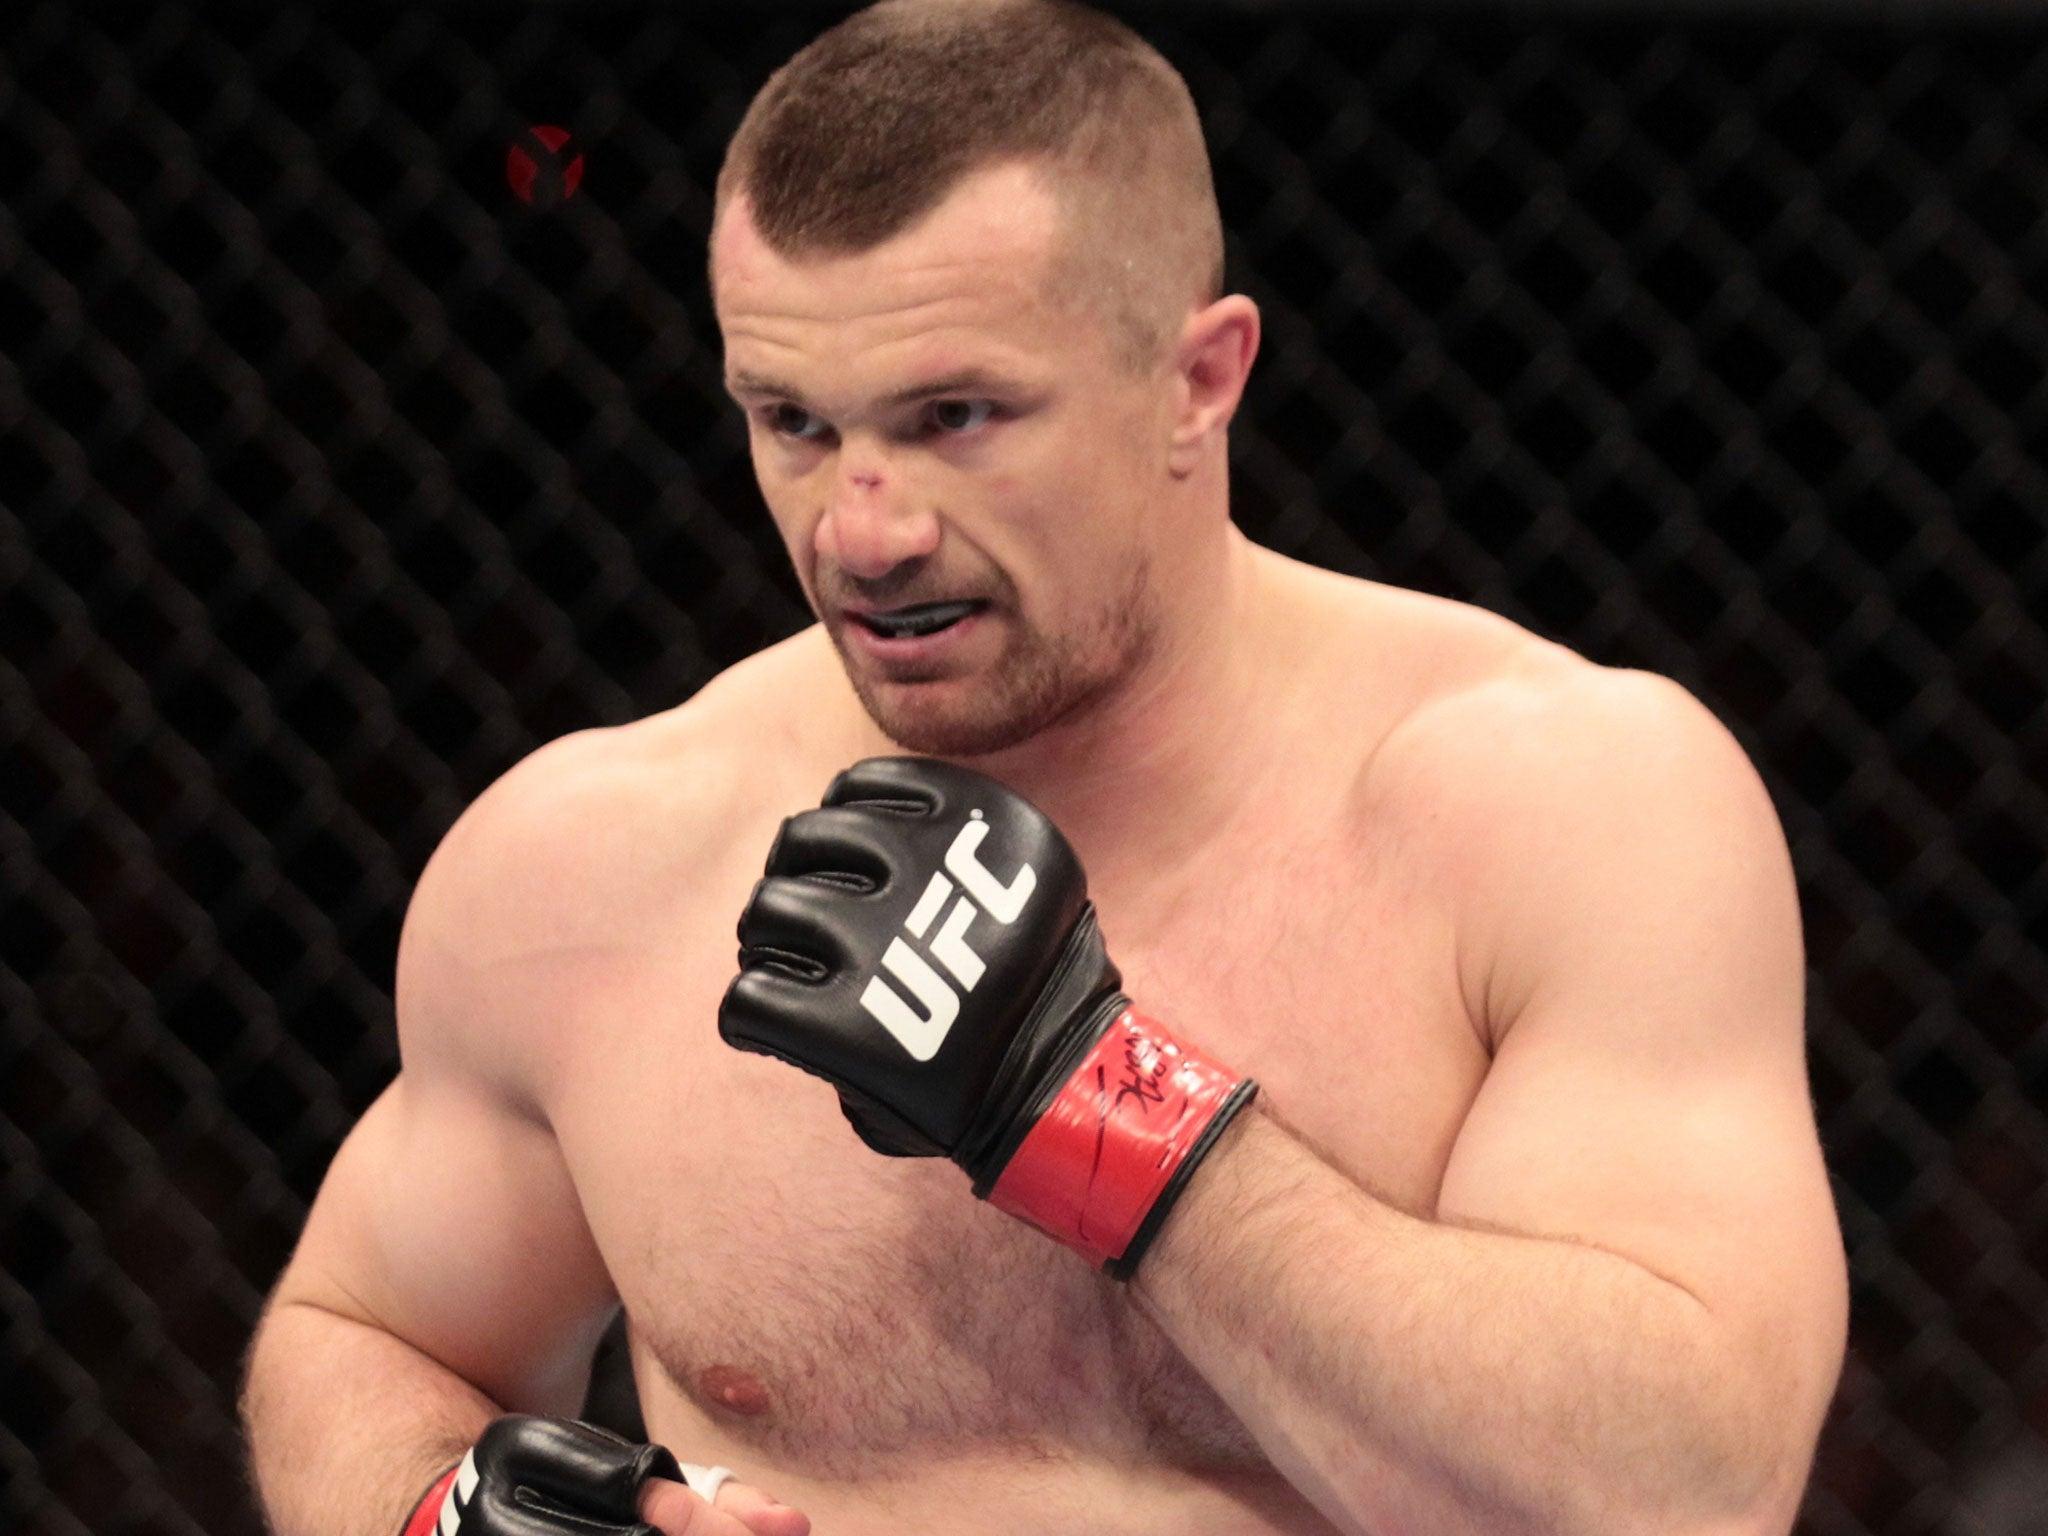 Mirko Cro Cop profile: Becoming the equalizer